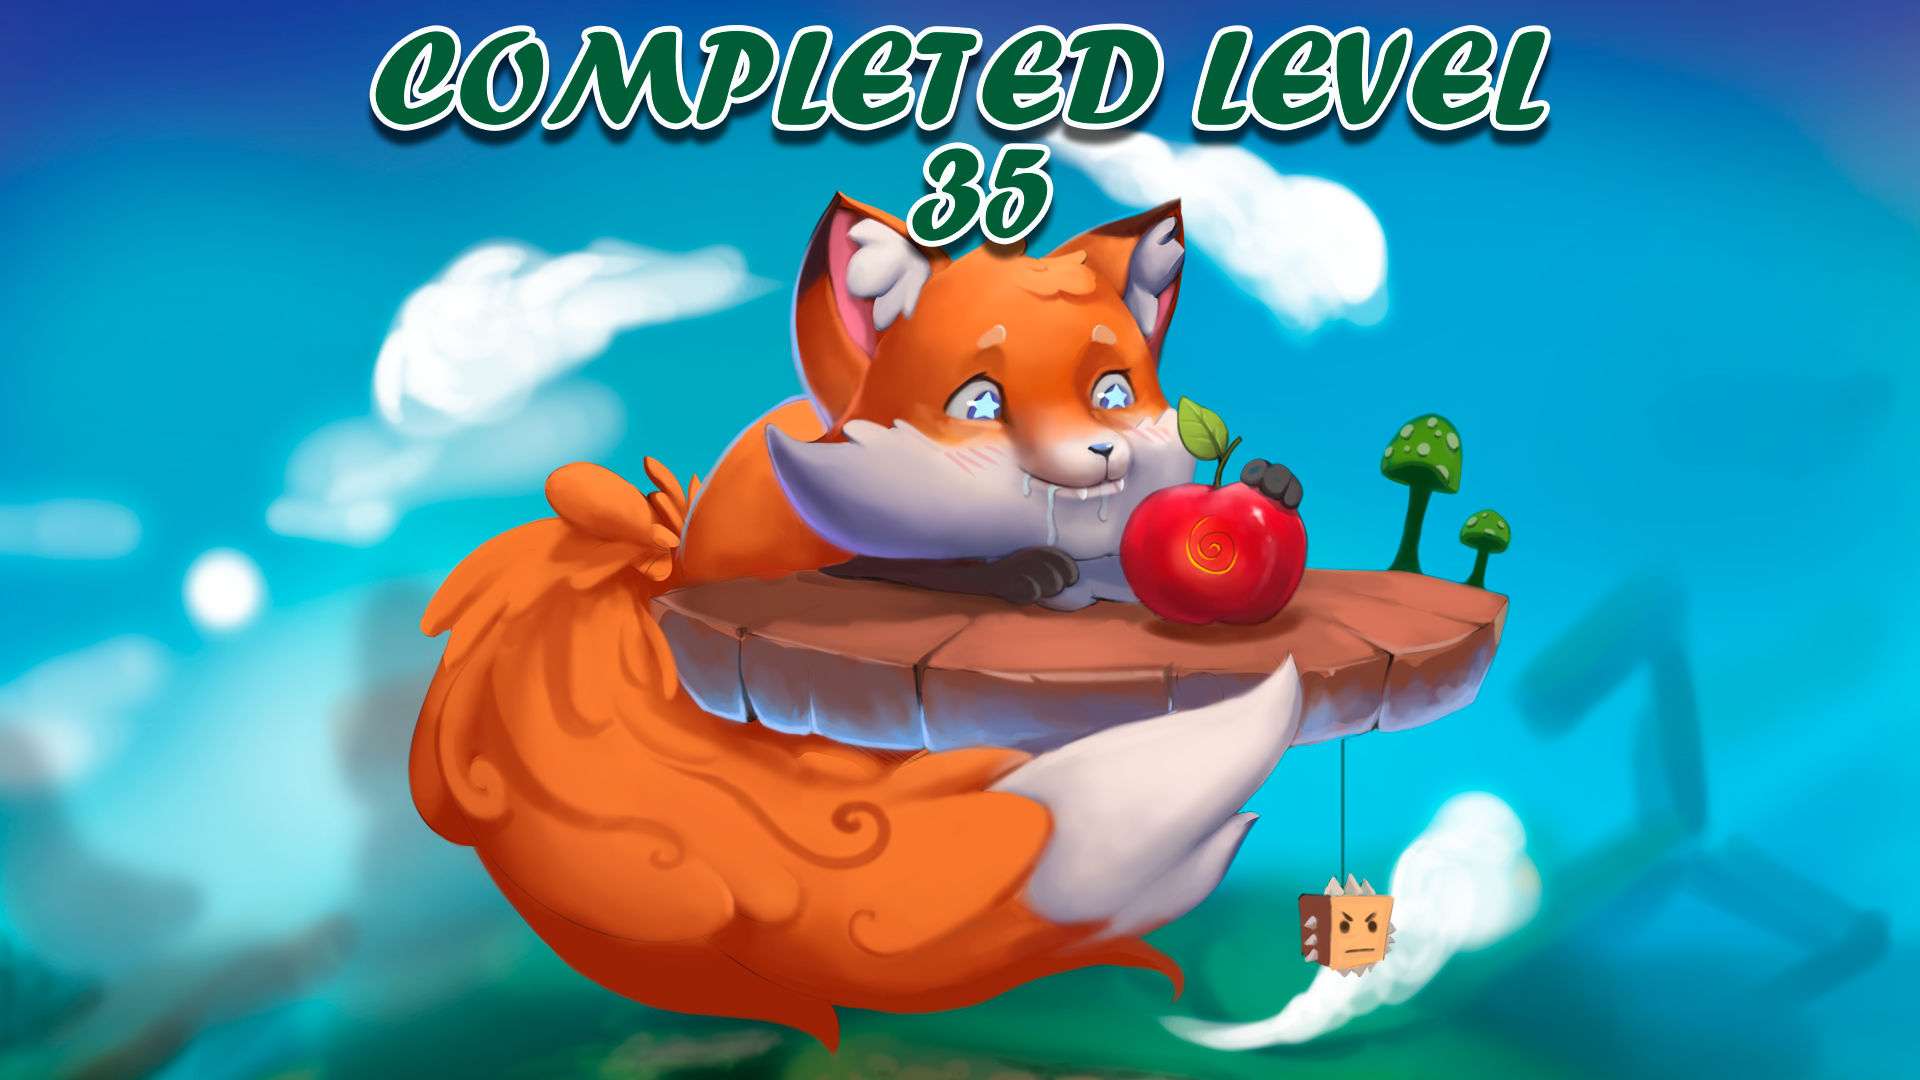 35 levels completed